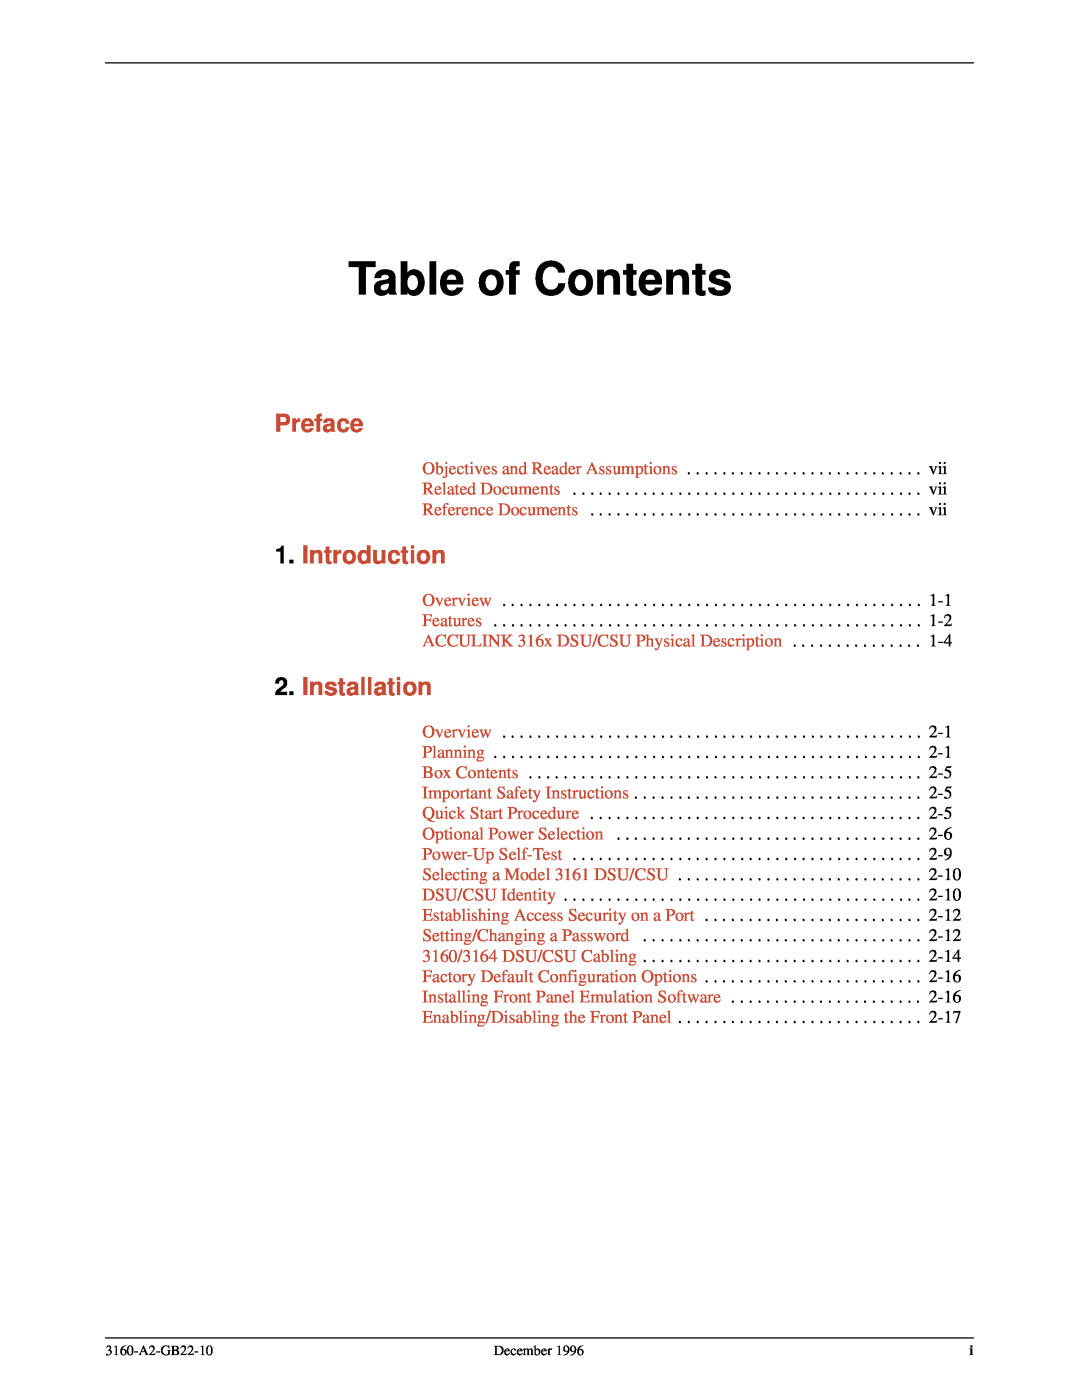 Paradyne manual Table of Contents, Preface, Introduction, Installation, ACCULINK 316x DSU/CSU Physical Description 